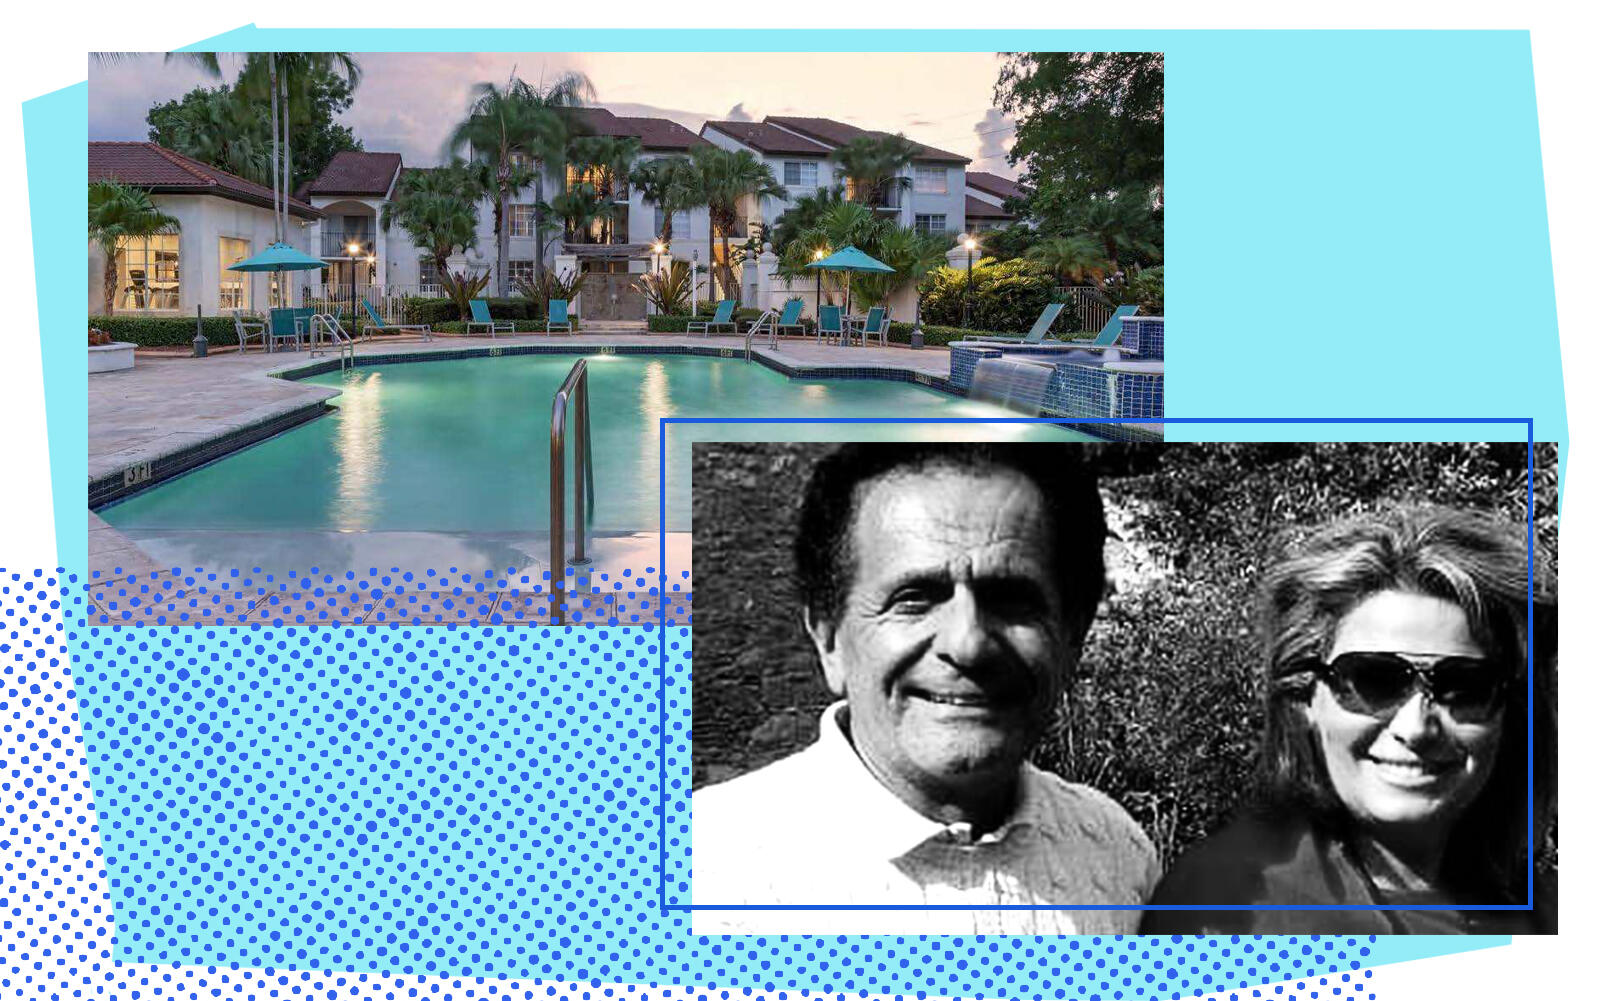 The Lakes of Deerfield at 1100 South Military Trail in Deerfield Beach with James and Marta Batmasian (Newmark)